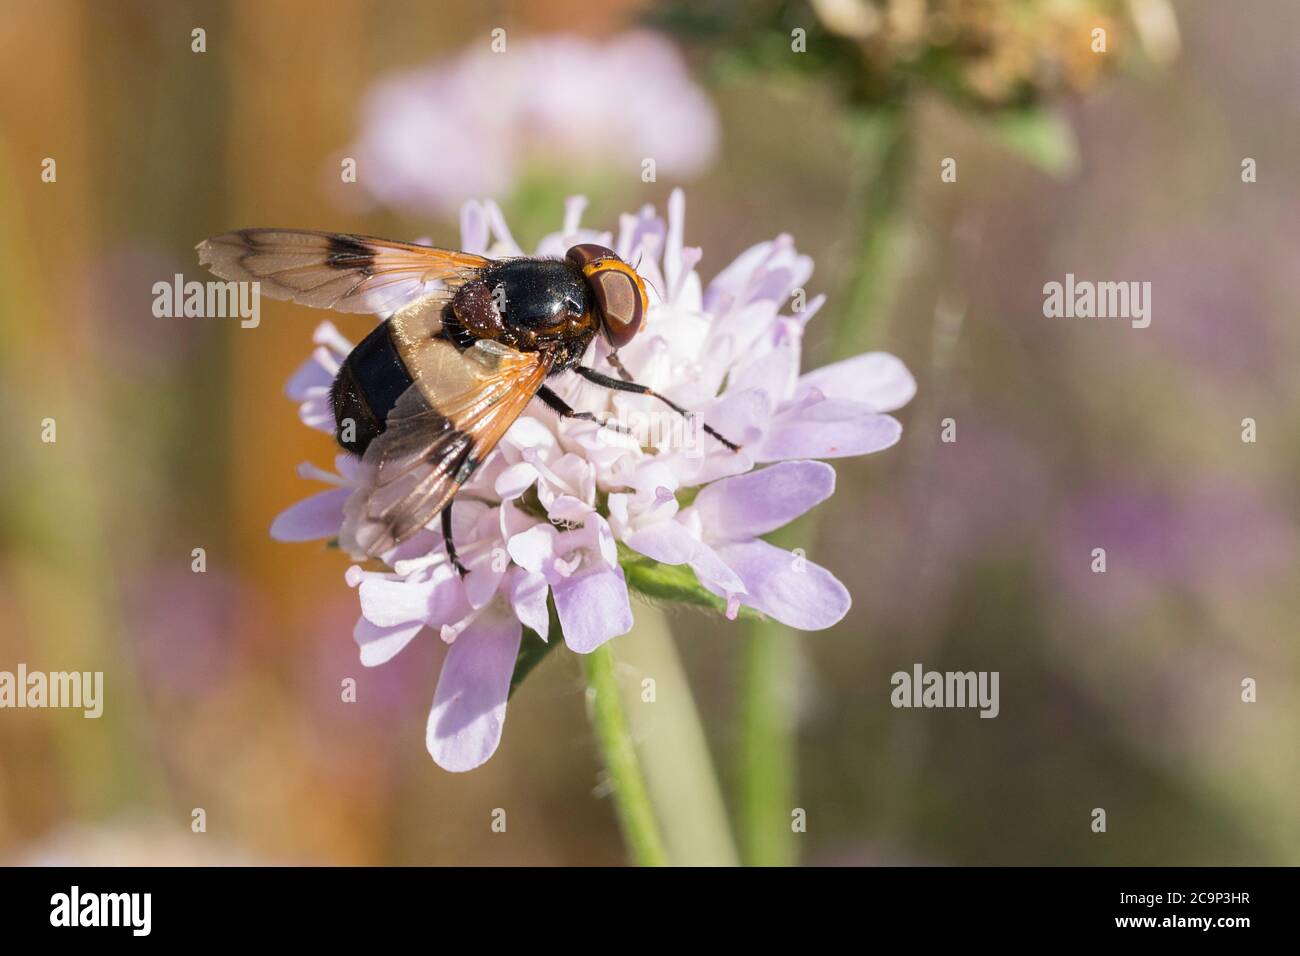 White banded drone fly (Volucella pellucens) on lilac flower has black tipped abdomen white ivory band black thorax yellow face and reddish brown eyes Stock Photo